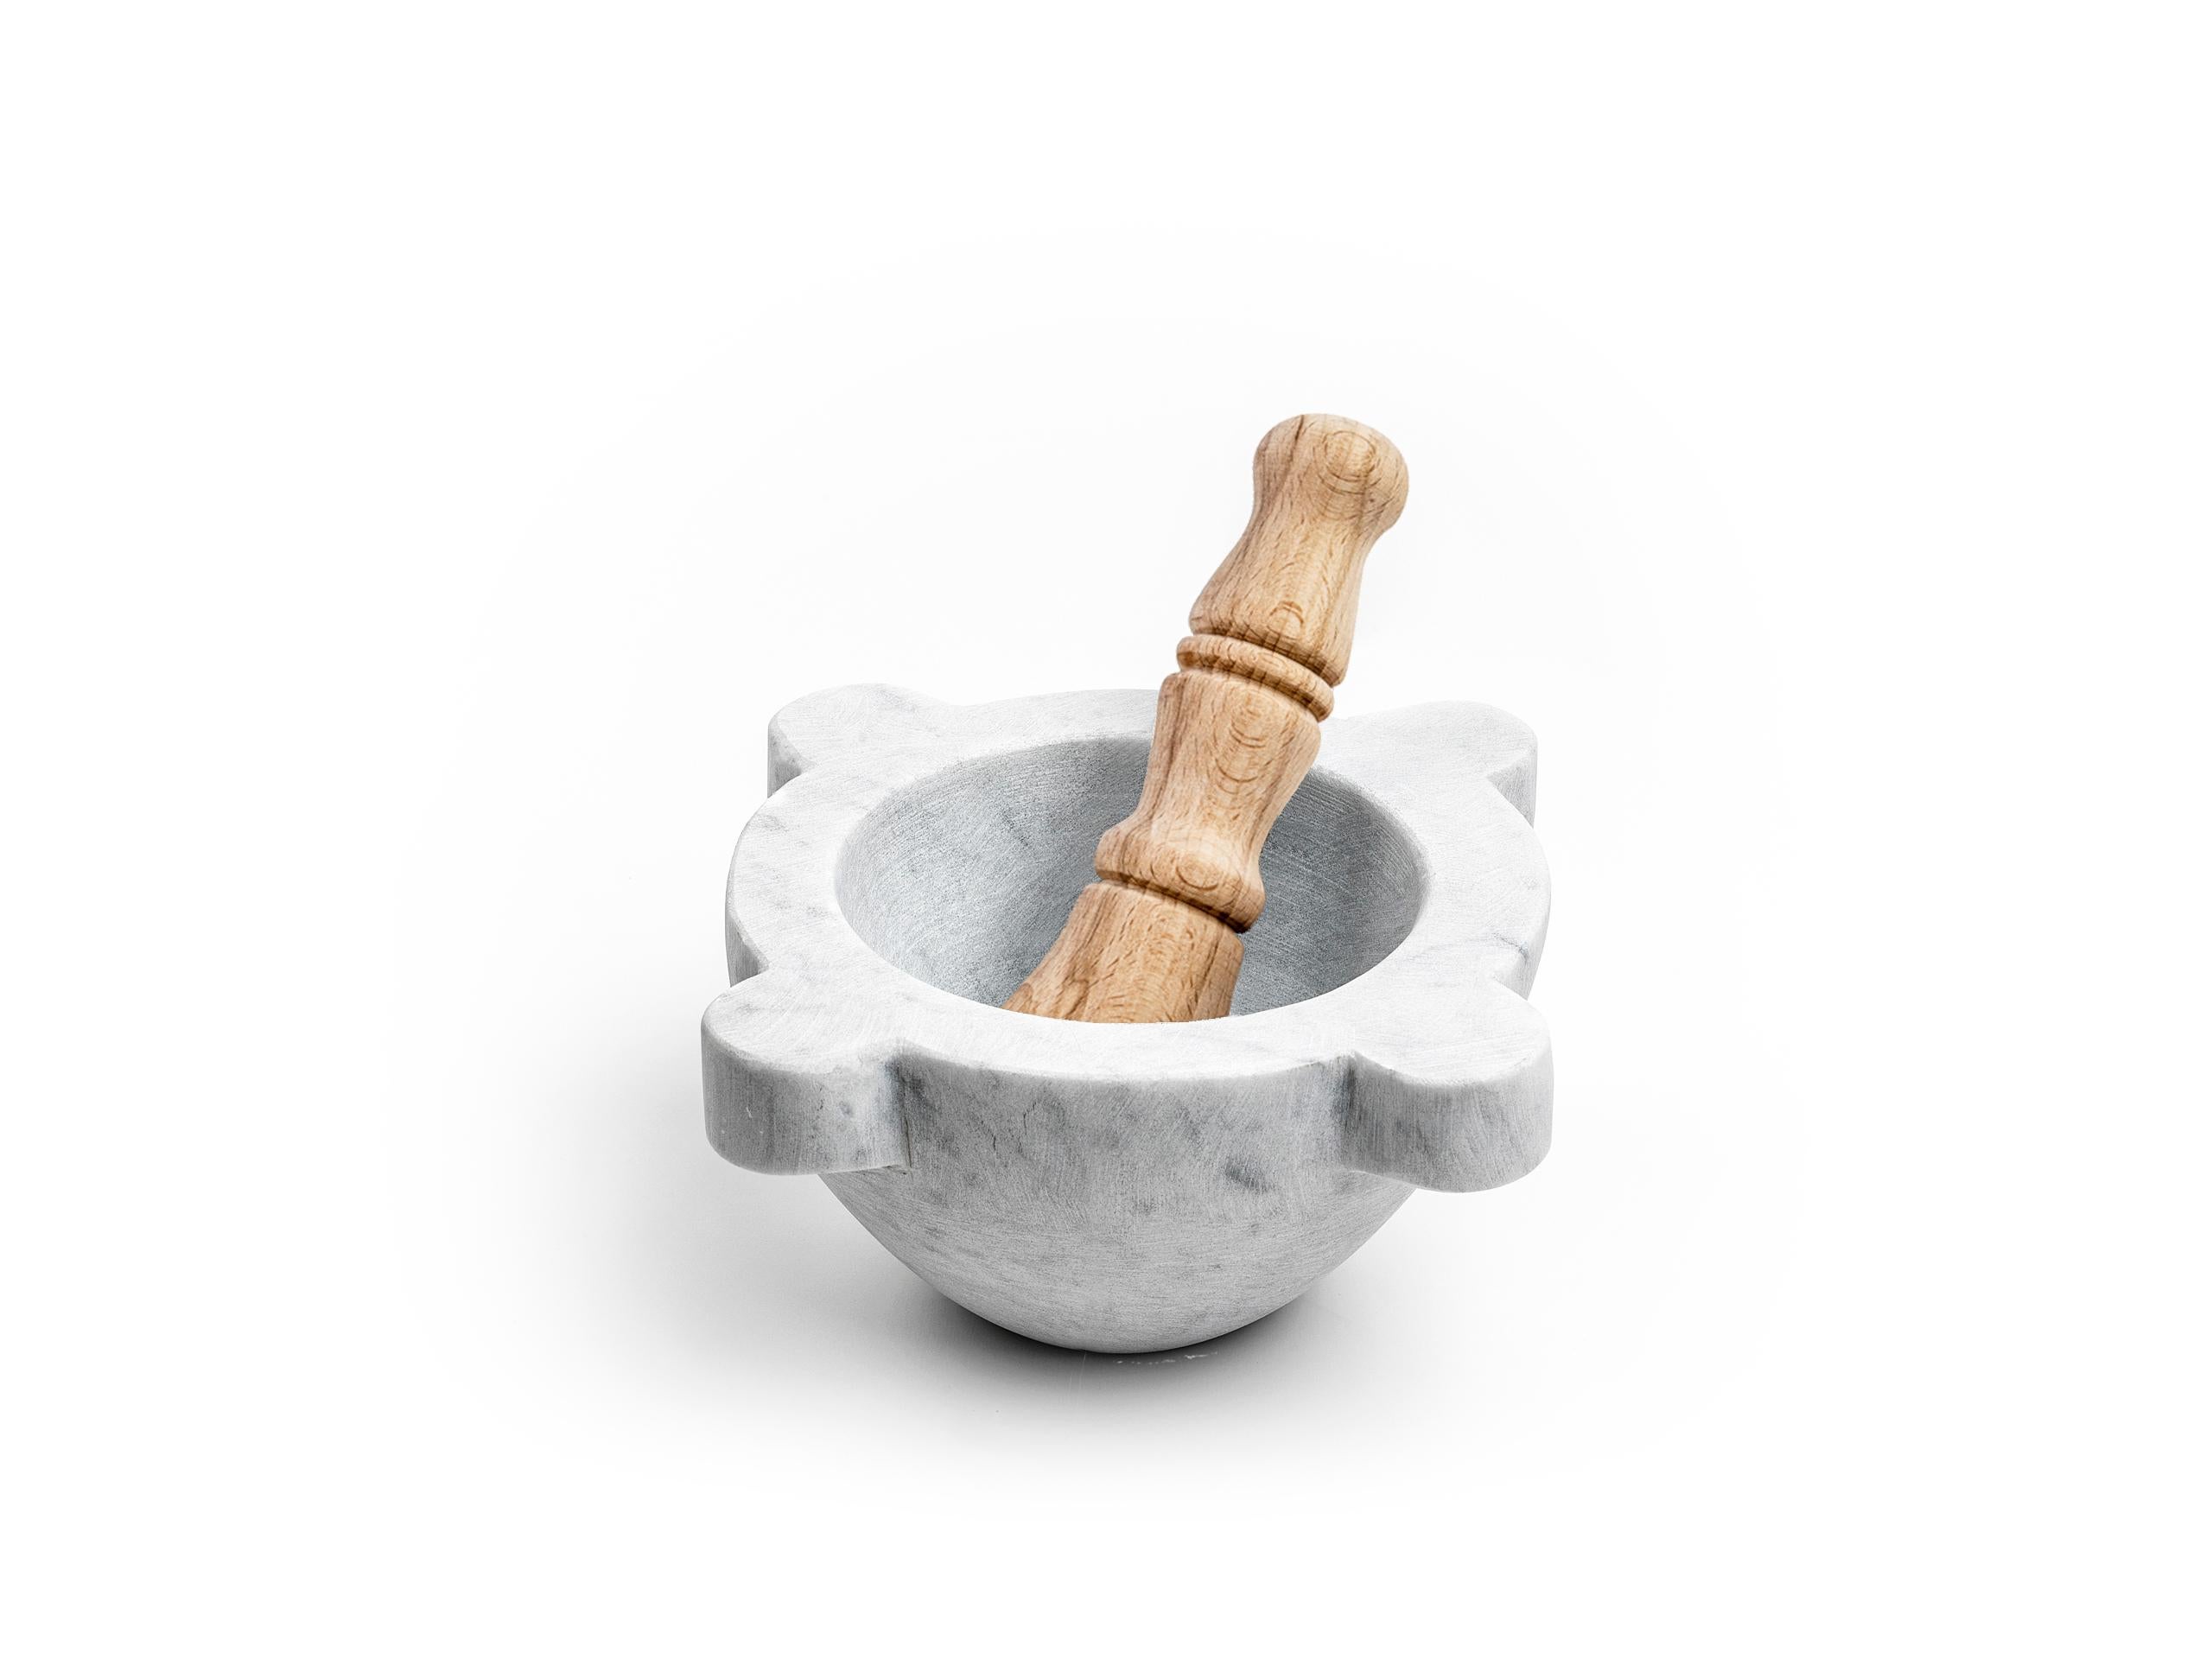 Satin white Carrara marble mortar with pestle in wood. 
The product can not be washed in dishwasher but needs to be cleaned with water or Marseille soap. It is certified for food use. It is a natural stone that tends to stain but this is part of